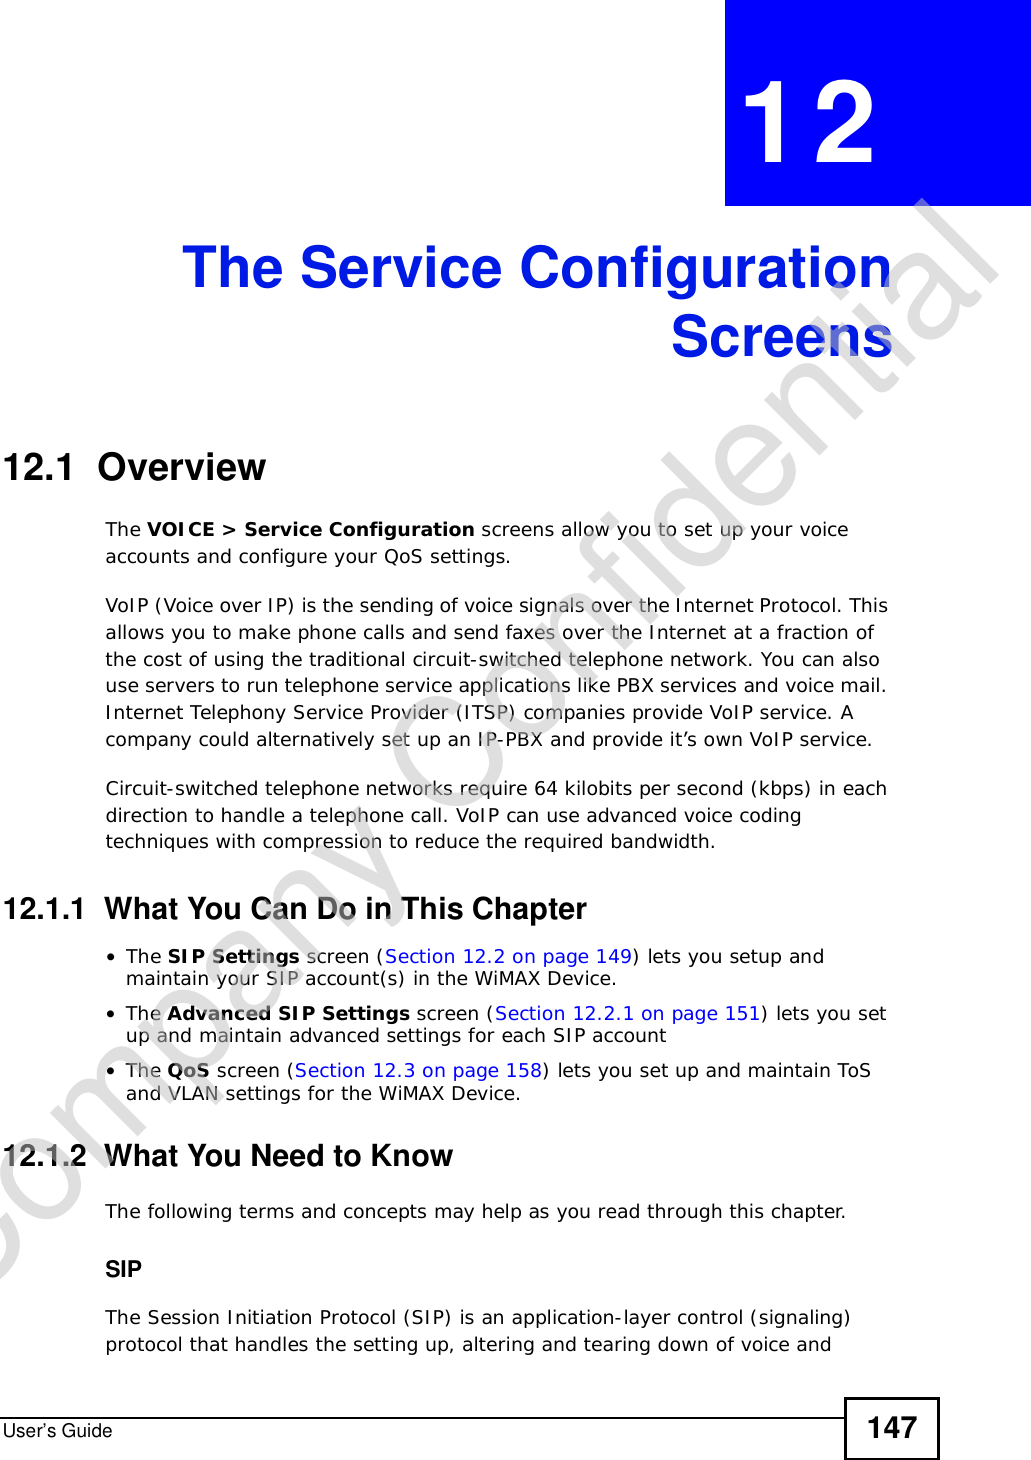 User’s Guide 147CHAPTER 12The Service ConfigurationScreens12.1  OverviewThe VOICE &gt; Service Configuration screens allow you to set up your voice accounts and configure your QoS settings.VoIP (Voice over IP) is the sending of voice signals over the Internet Protocol. This allows you to make phone calls and send faxes over the Internet at a fraction of the cost of using the traditional circuit-switched telephone network. You can also use servers to run telephone service applications like PBX services and voice mail. Internet Telephony Service Provider (ITSP) companies provide VoIP service. A company could alternatively set up an IP-PBX and provide it’s own VoIP service.Circuit-switched telephone networks require 64 kilobits per second (kbps) in each direction to handle a telephone call. VoIP can use advanced voice coding techniques with compression to reduce the required bandwidth.12.1.1  What You Can Do in This Chapter•The SIP Settings screen (Section 12.2 on page 149) lets you setup and maintain your SIP account(s) in the WiMAX Device.•The Advanced SIP Settings screen (Section 12.2.1 on page 151) lets you set up and maintain advanced settings for each SIP account•The QoS screen (Section 12.3 on page 158) lets you set up and maintain ToS and VLAN settings for the WiMAX Device.12.1.2  What You Need to KnowThe following terms and concepts may help as you read through this chapter.SIPThe Session Initiation Protocol (SIP) is an application-layer control (signaling) protocol that handles the setting up, altering and tearing down of voice and Company Confidential